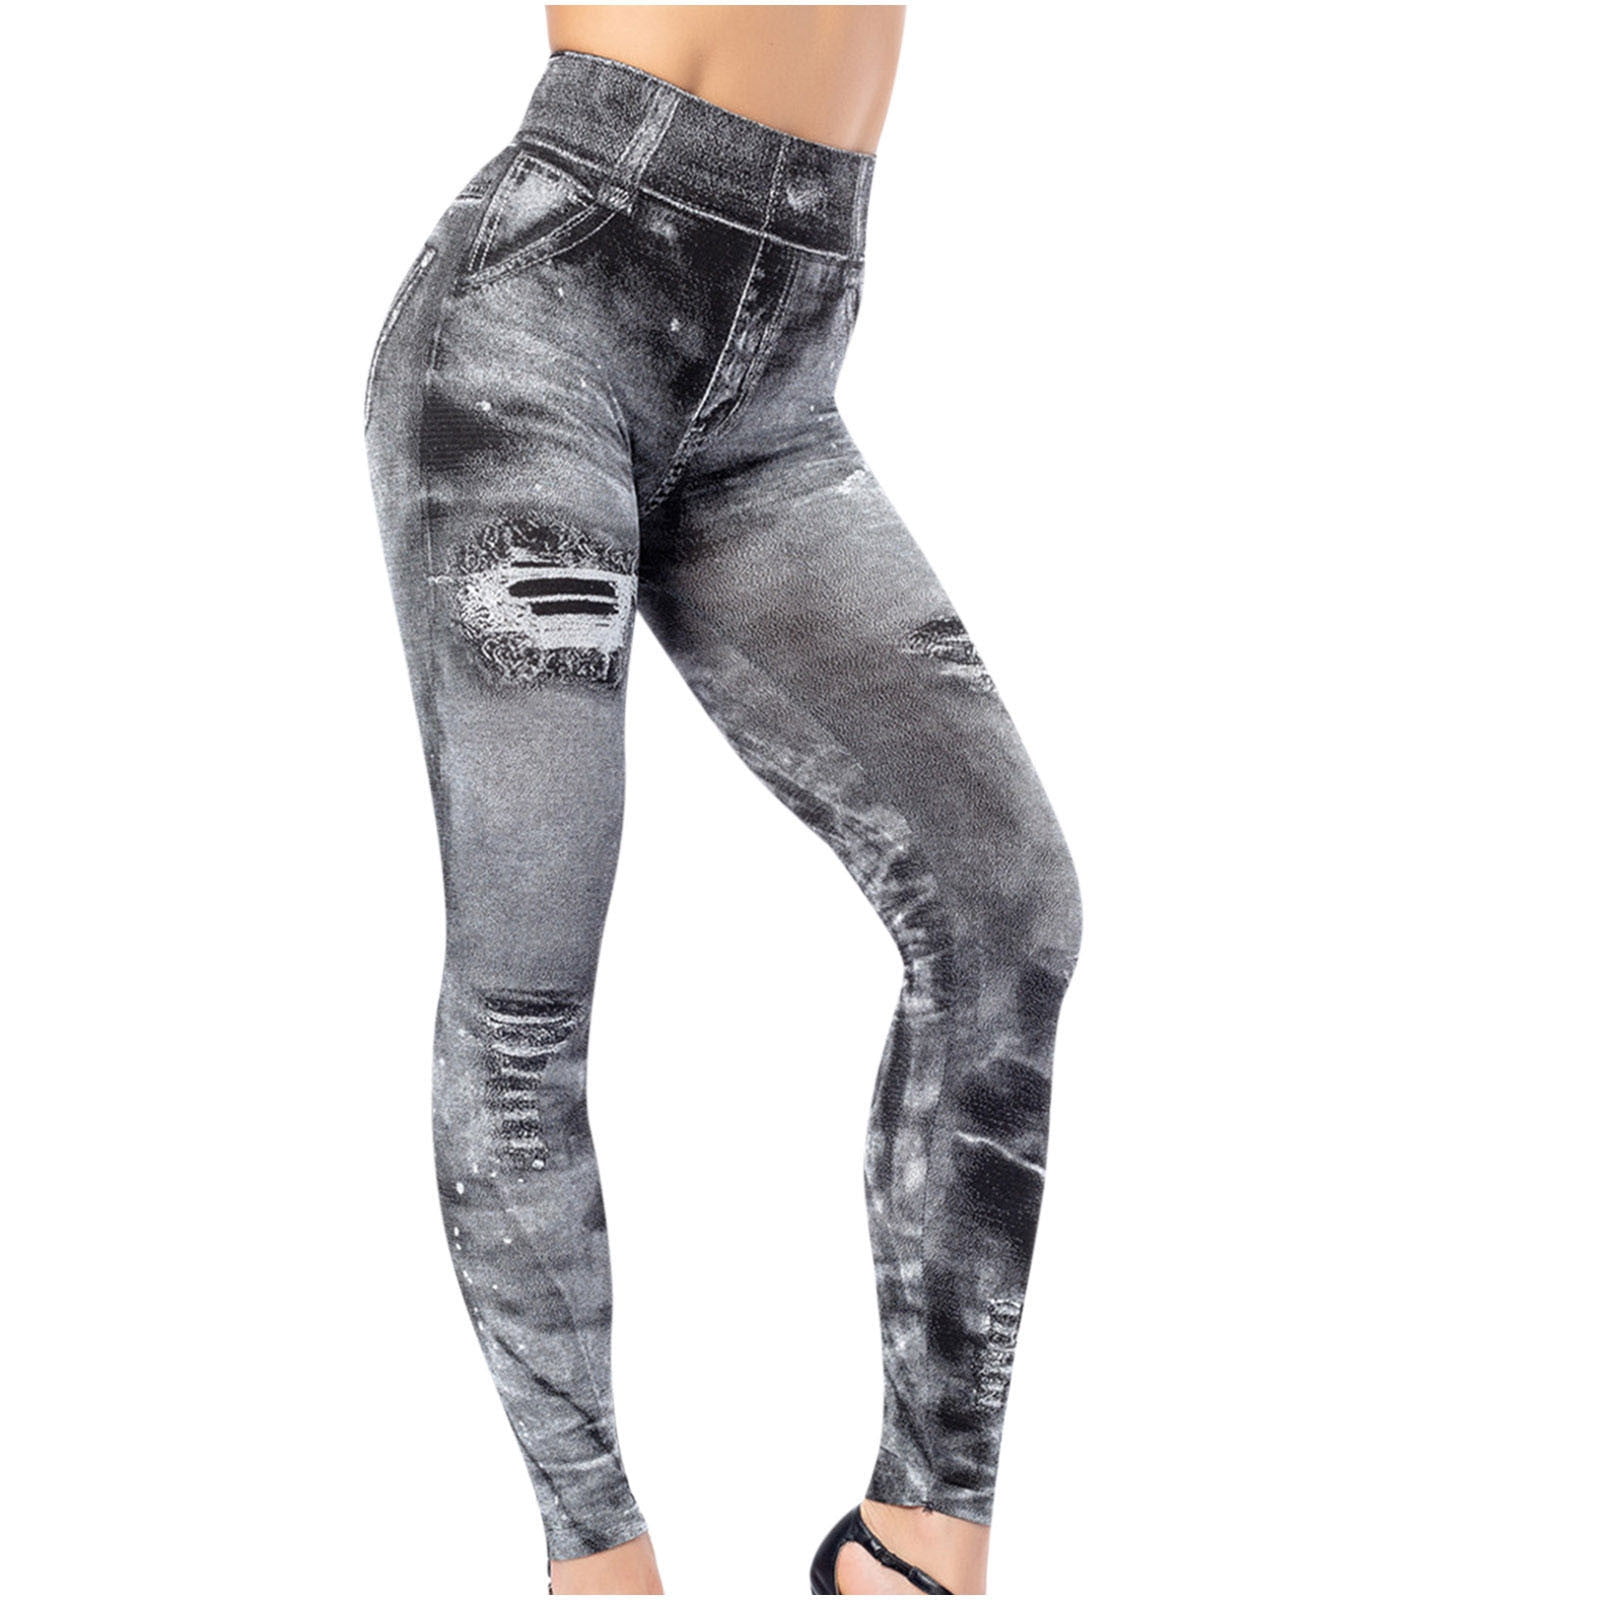 YYDGH Leggings for Women Distressed Ripped Denim Jeggings High Waist Tummy  Control Yoga Pants Stretchy Skinny Jeans Tights Gray M 